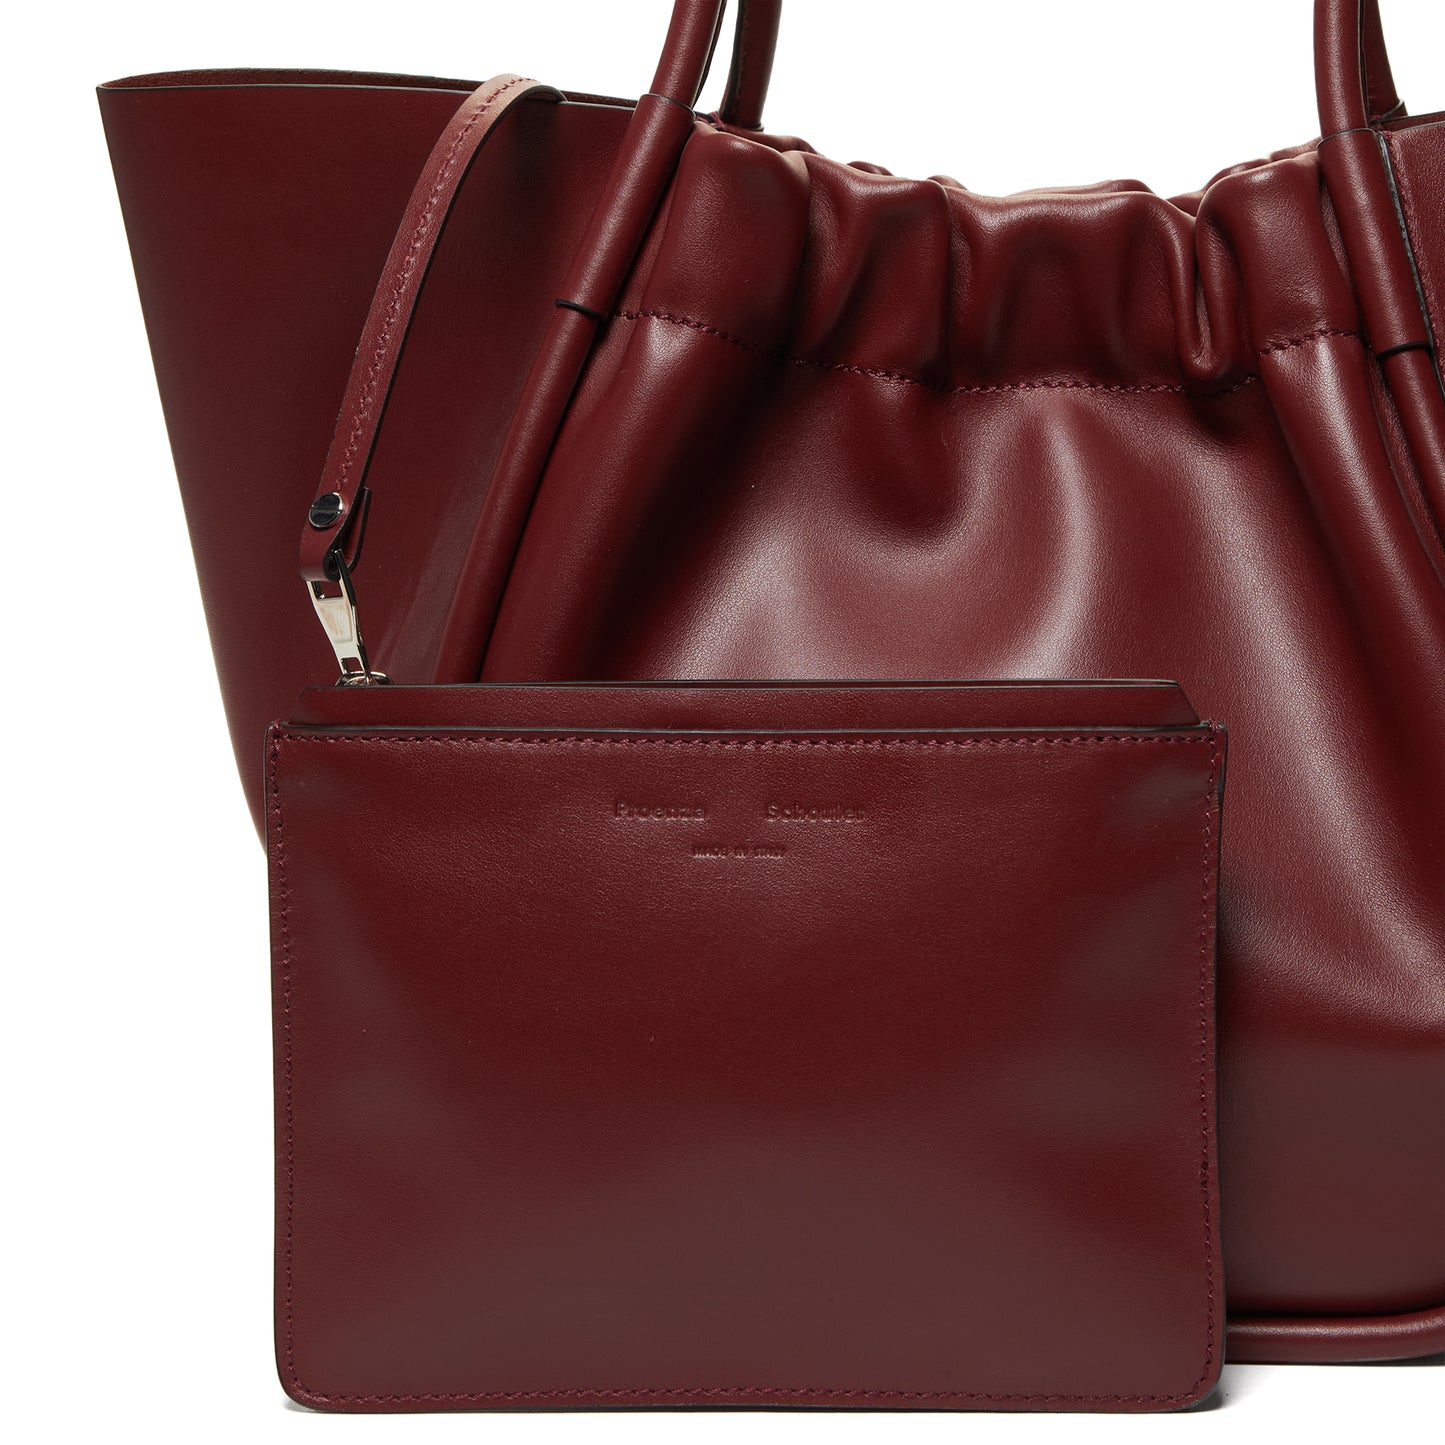 Proenza Schouler Large Ruched Tote (Oxblood)